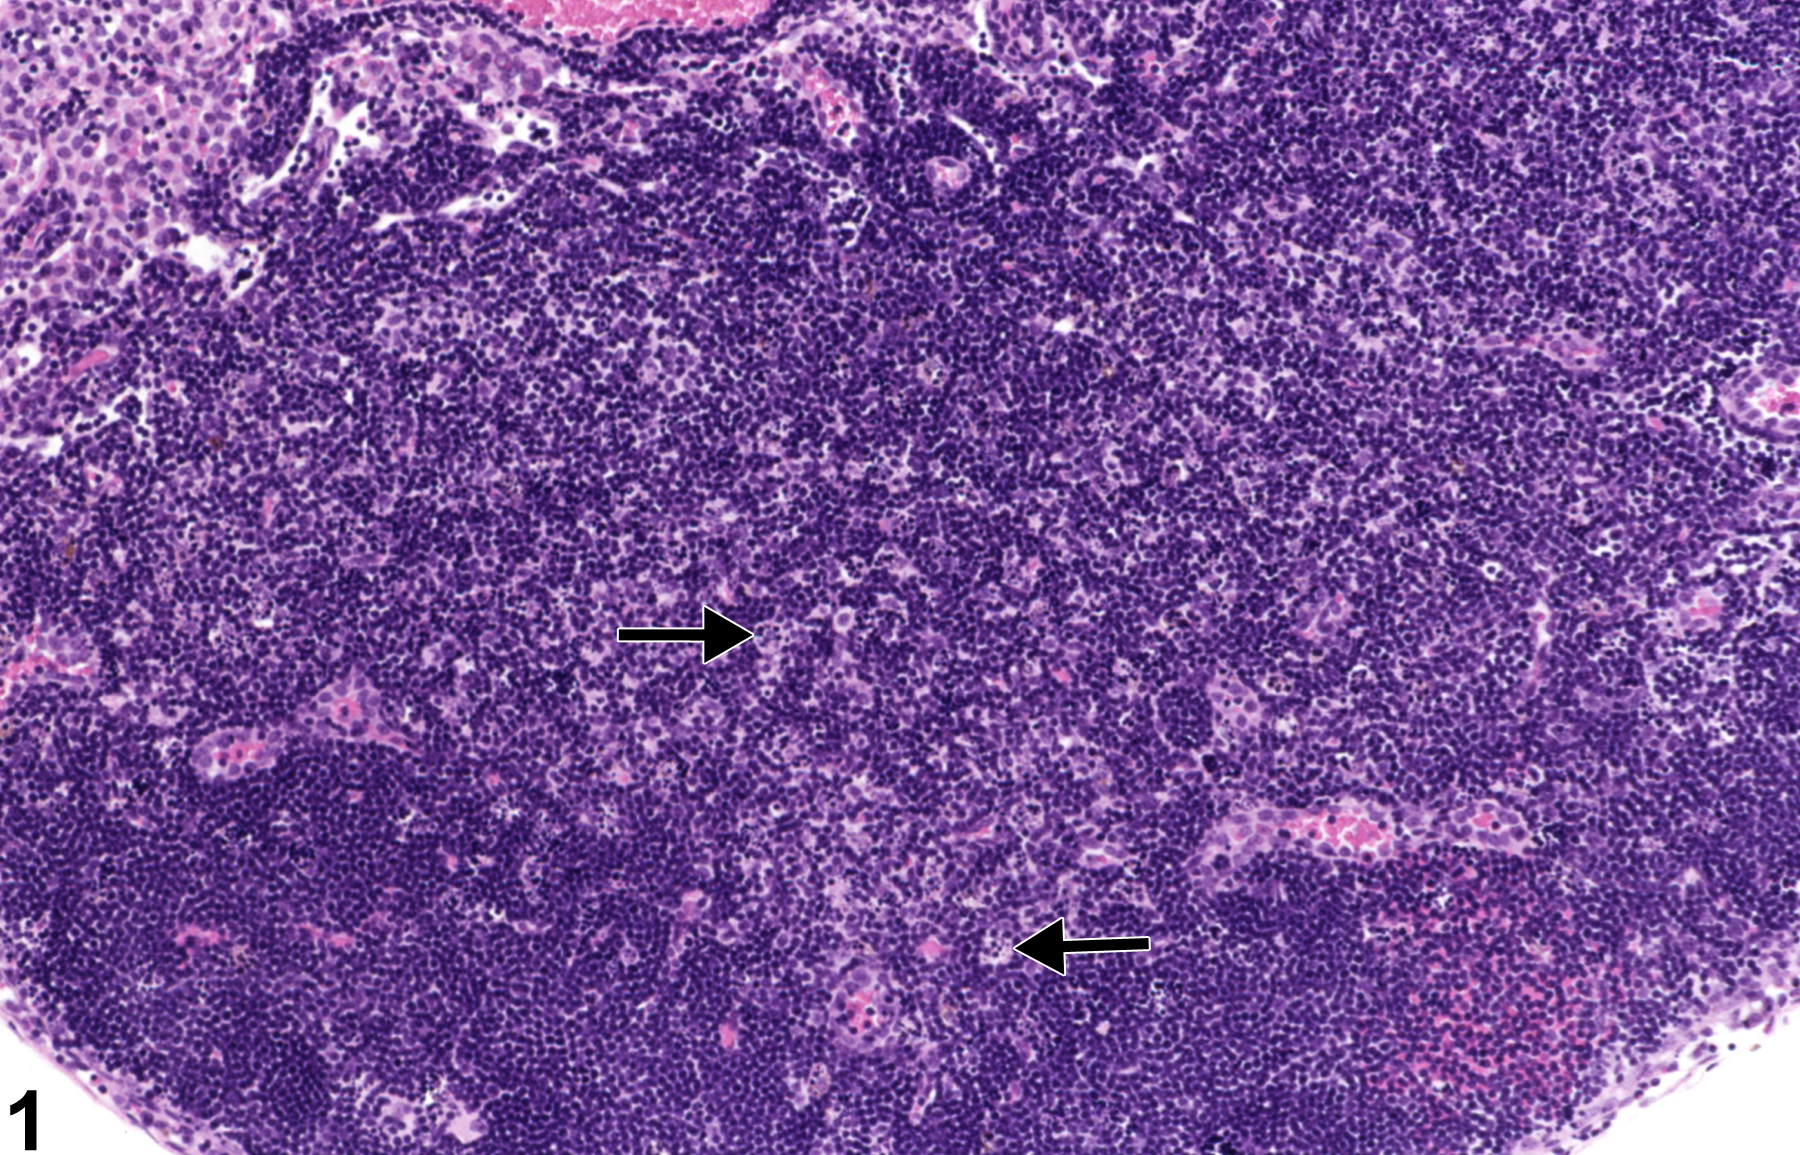 Image of apoptosis, lymphocyte in the lymph node from a female B6C3F1/N mouse in a subchronic study